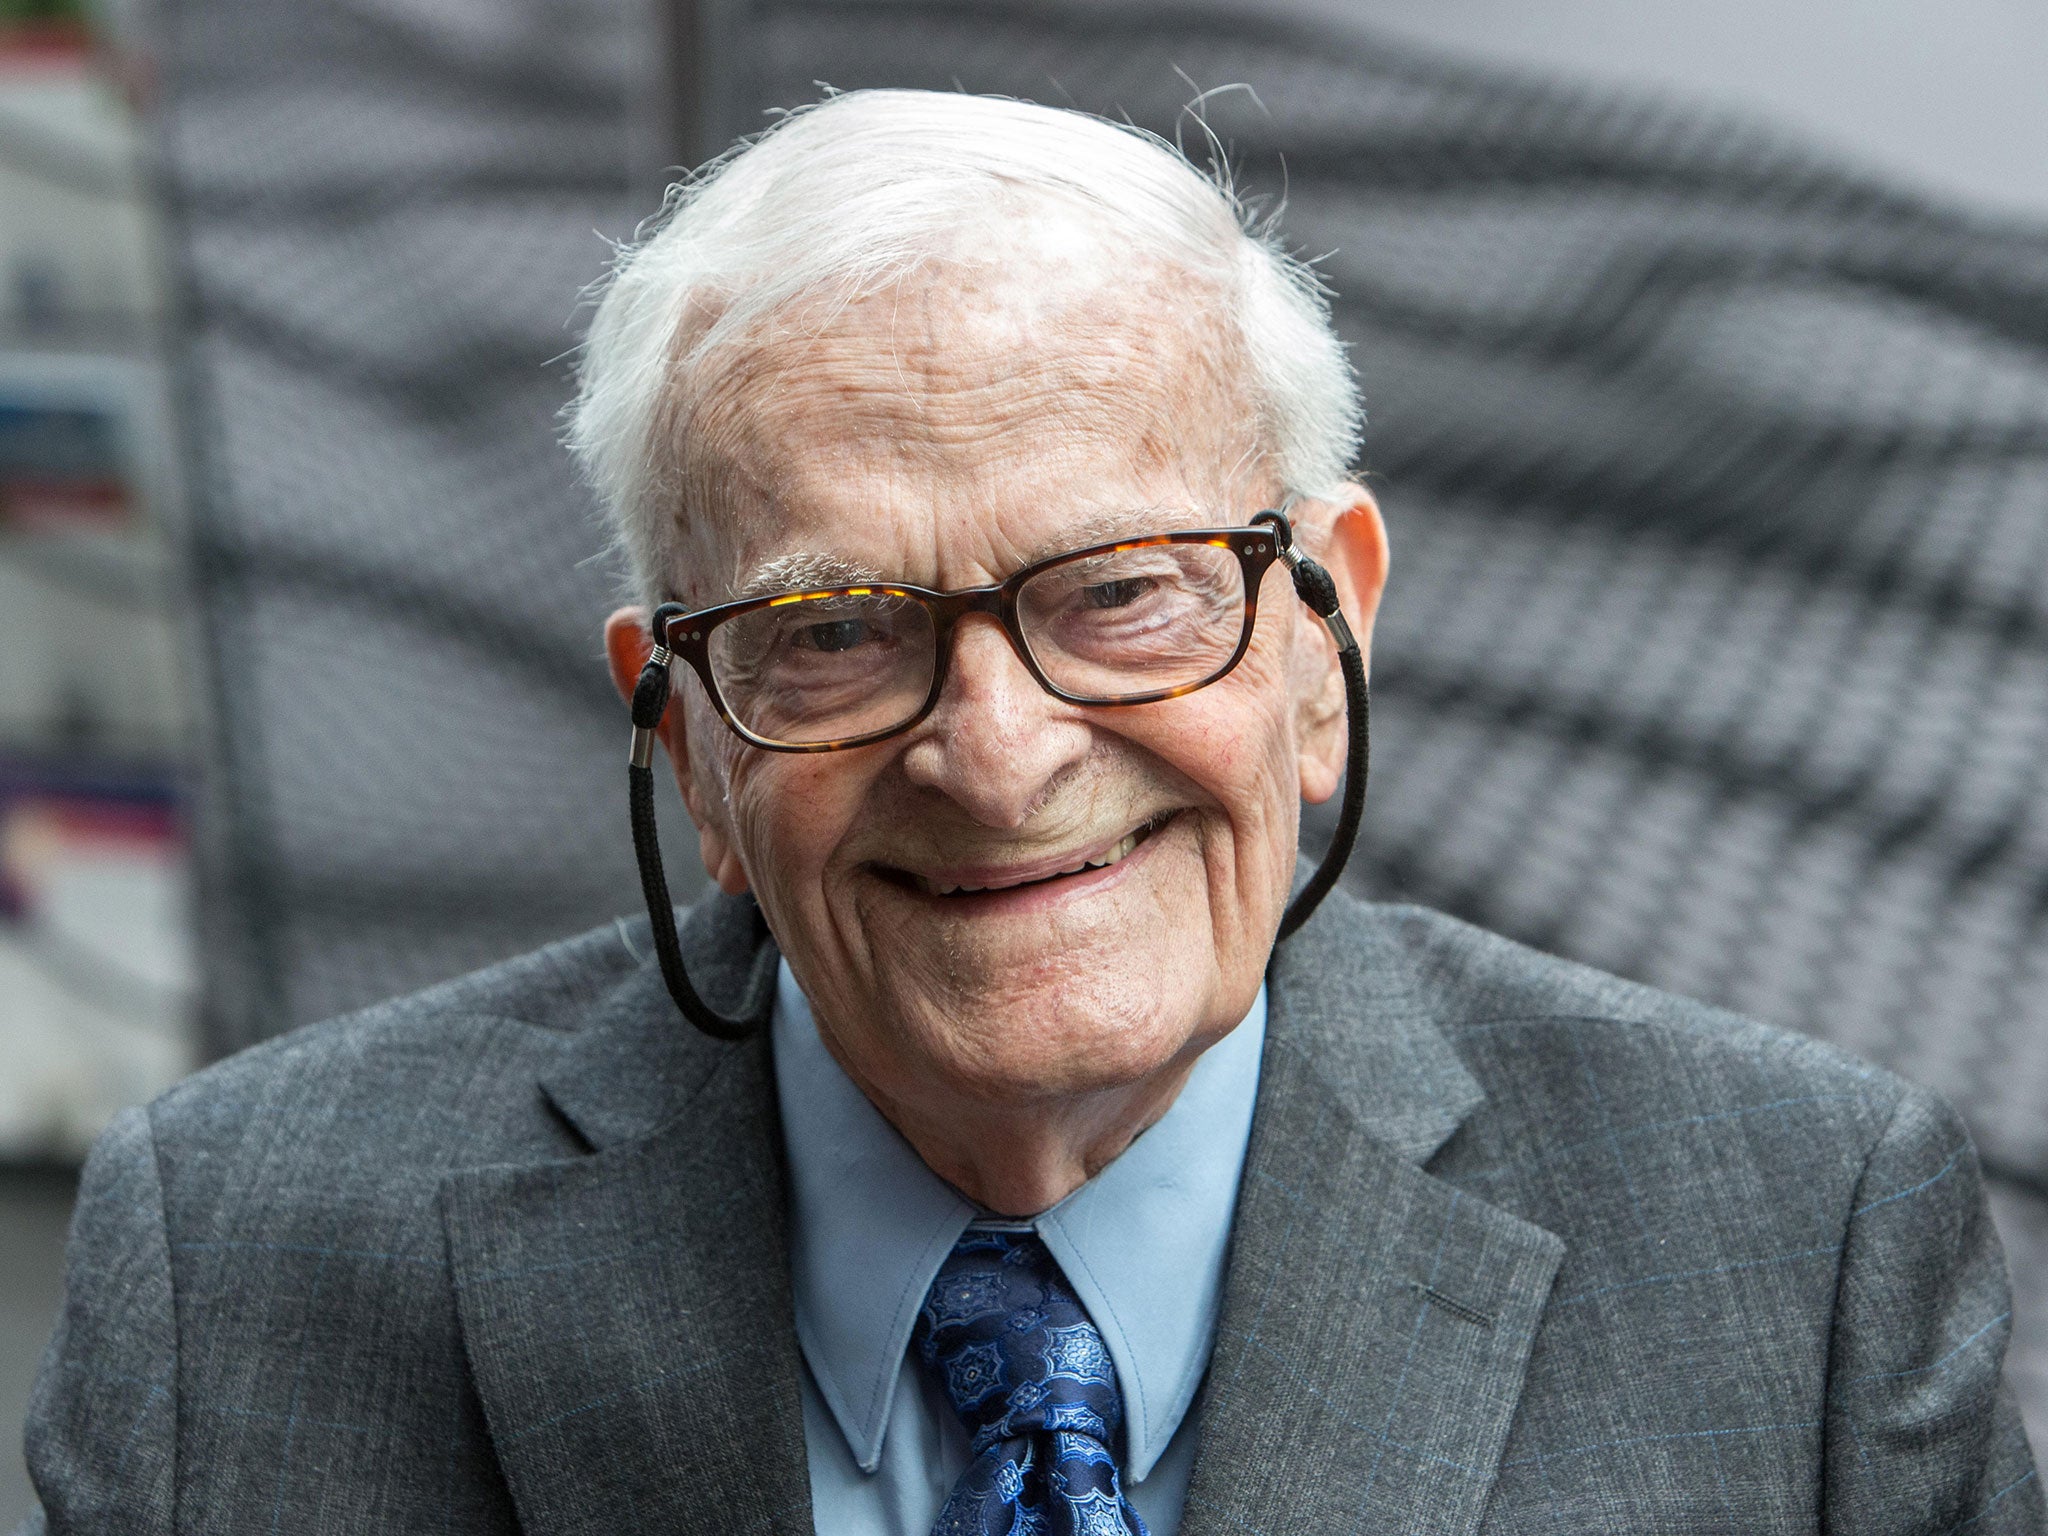 Harry Leslie Smith said today’s politicians must leave their ‘ivory towers’ to deal with poverty and hunger